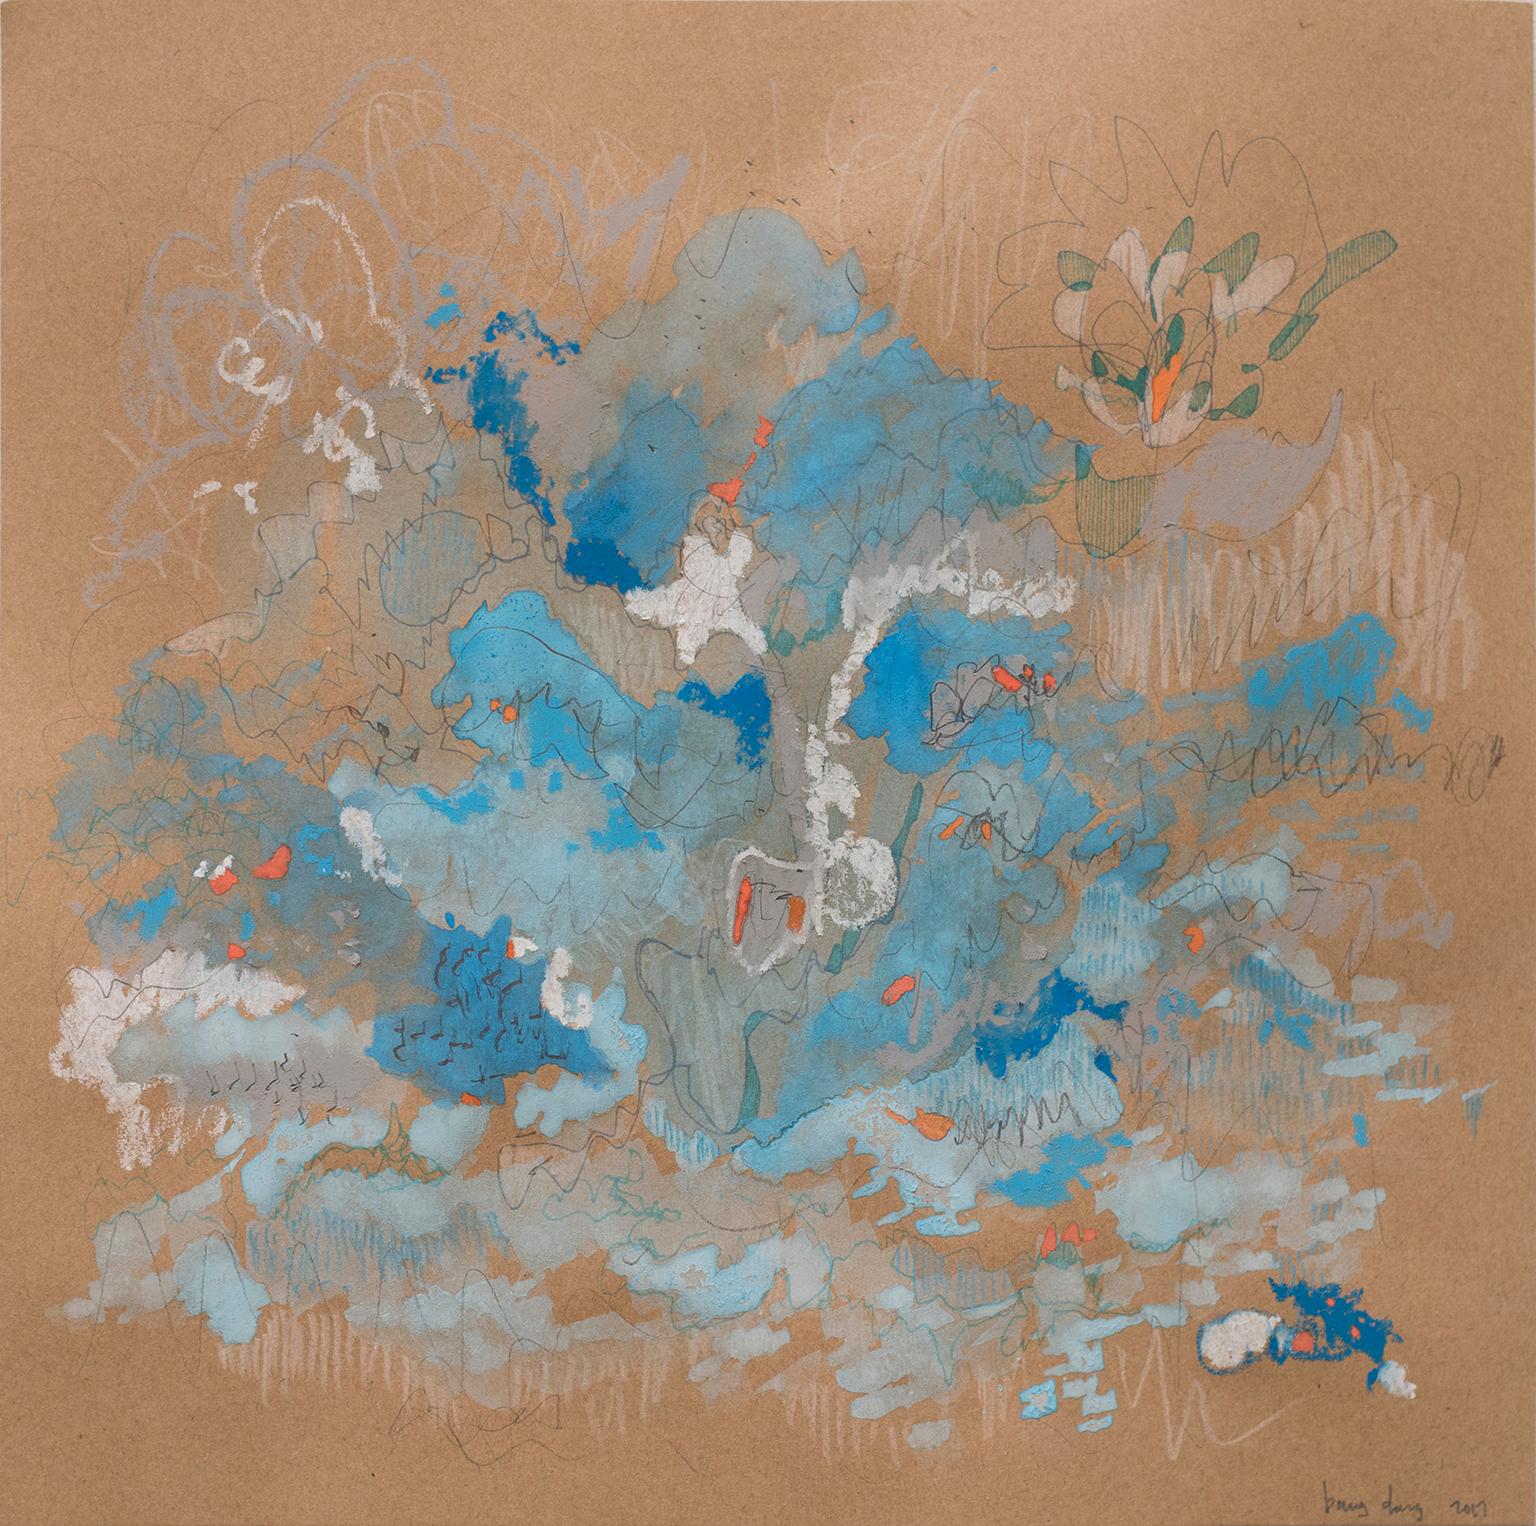 Blue Tango by Bang Dang
Watercolor, ink, graphite, color pencil, pastels and markers on brown paper.
12 x 12 inches unframed
15.25 x 15.25 x 1.75 inches with Frame. Professionally float framed with white frame and 1" mat.


Bang Dang's work is a